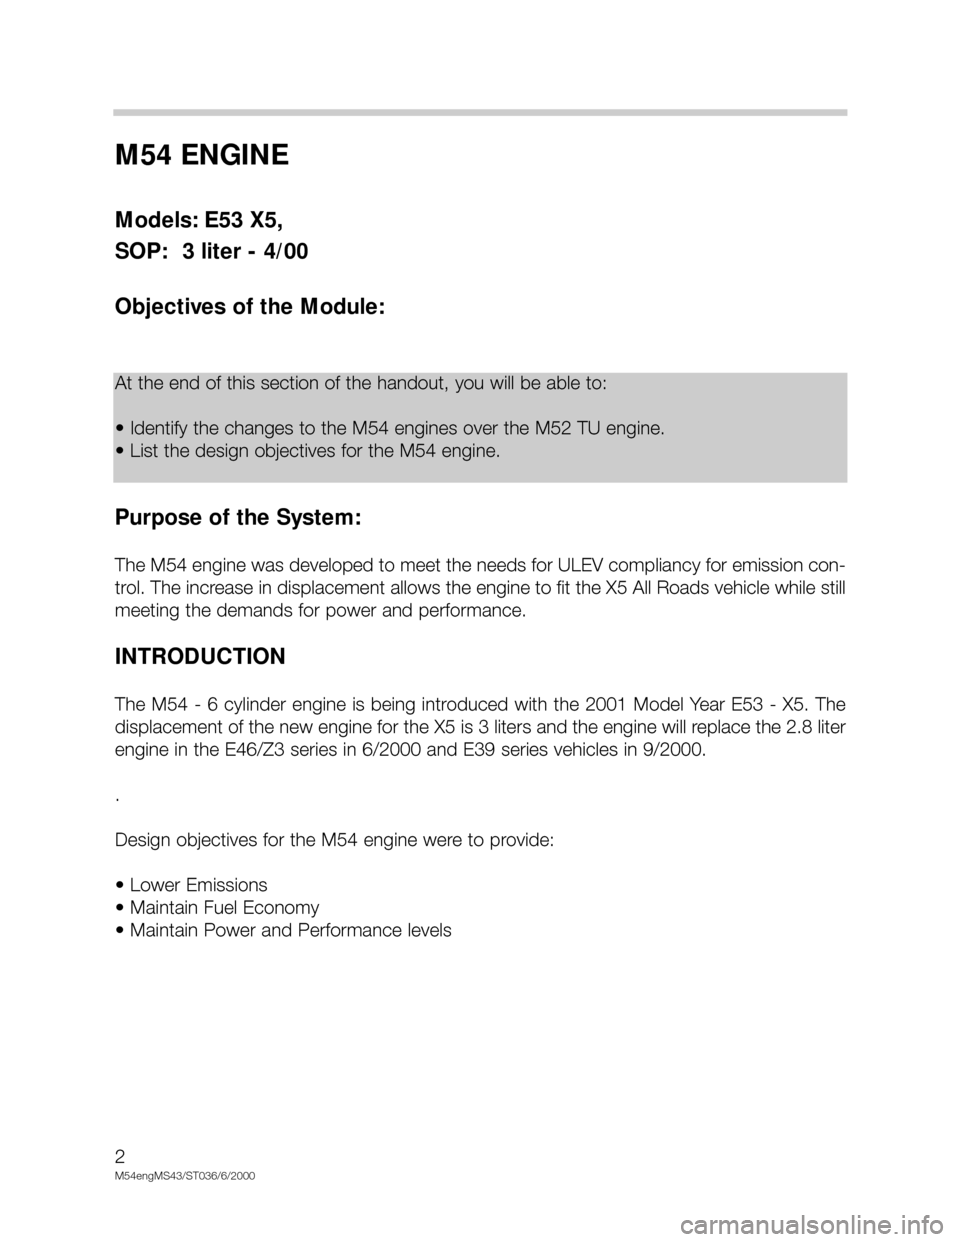 BMW X5 2002 E53 M54 Engine Workshop Manual M54 ENGINE 
Models: E53 X5, 
SOP:  3 liter - 4/00
Objectives of the Module:
Purpose of the System:
The M54 engine was developed to meet the needs for ULEV compliancy for emission con-
trol. The increa